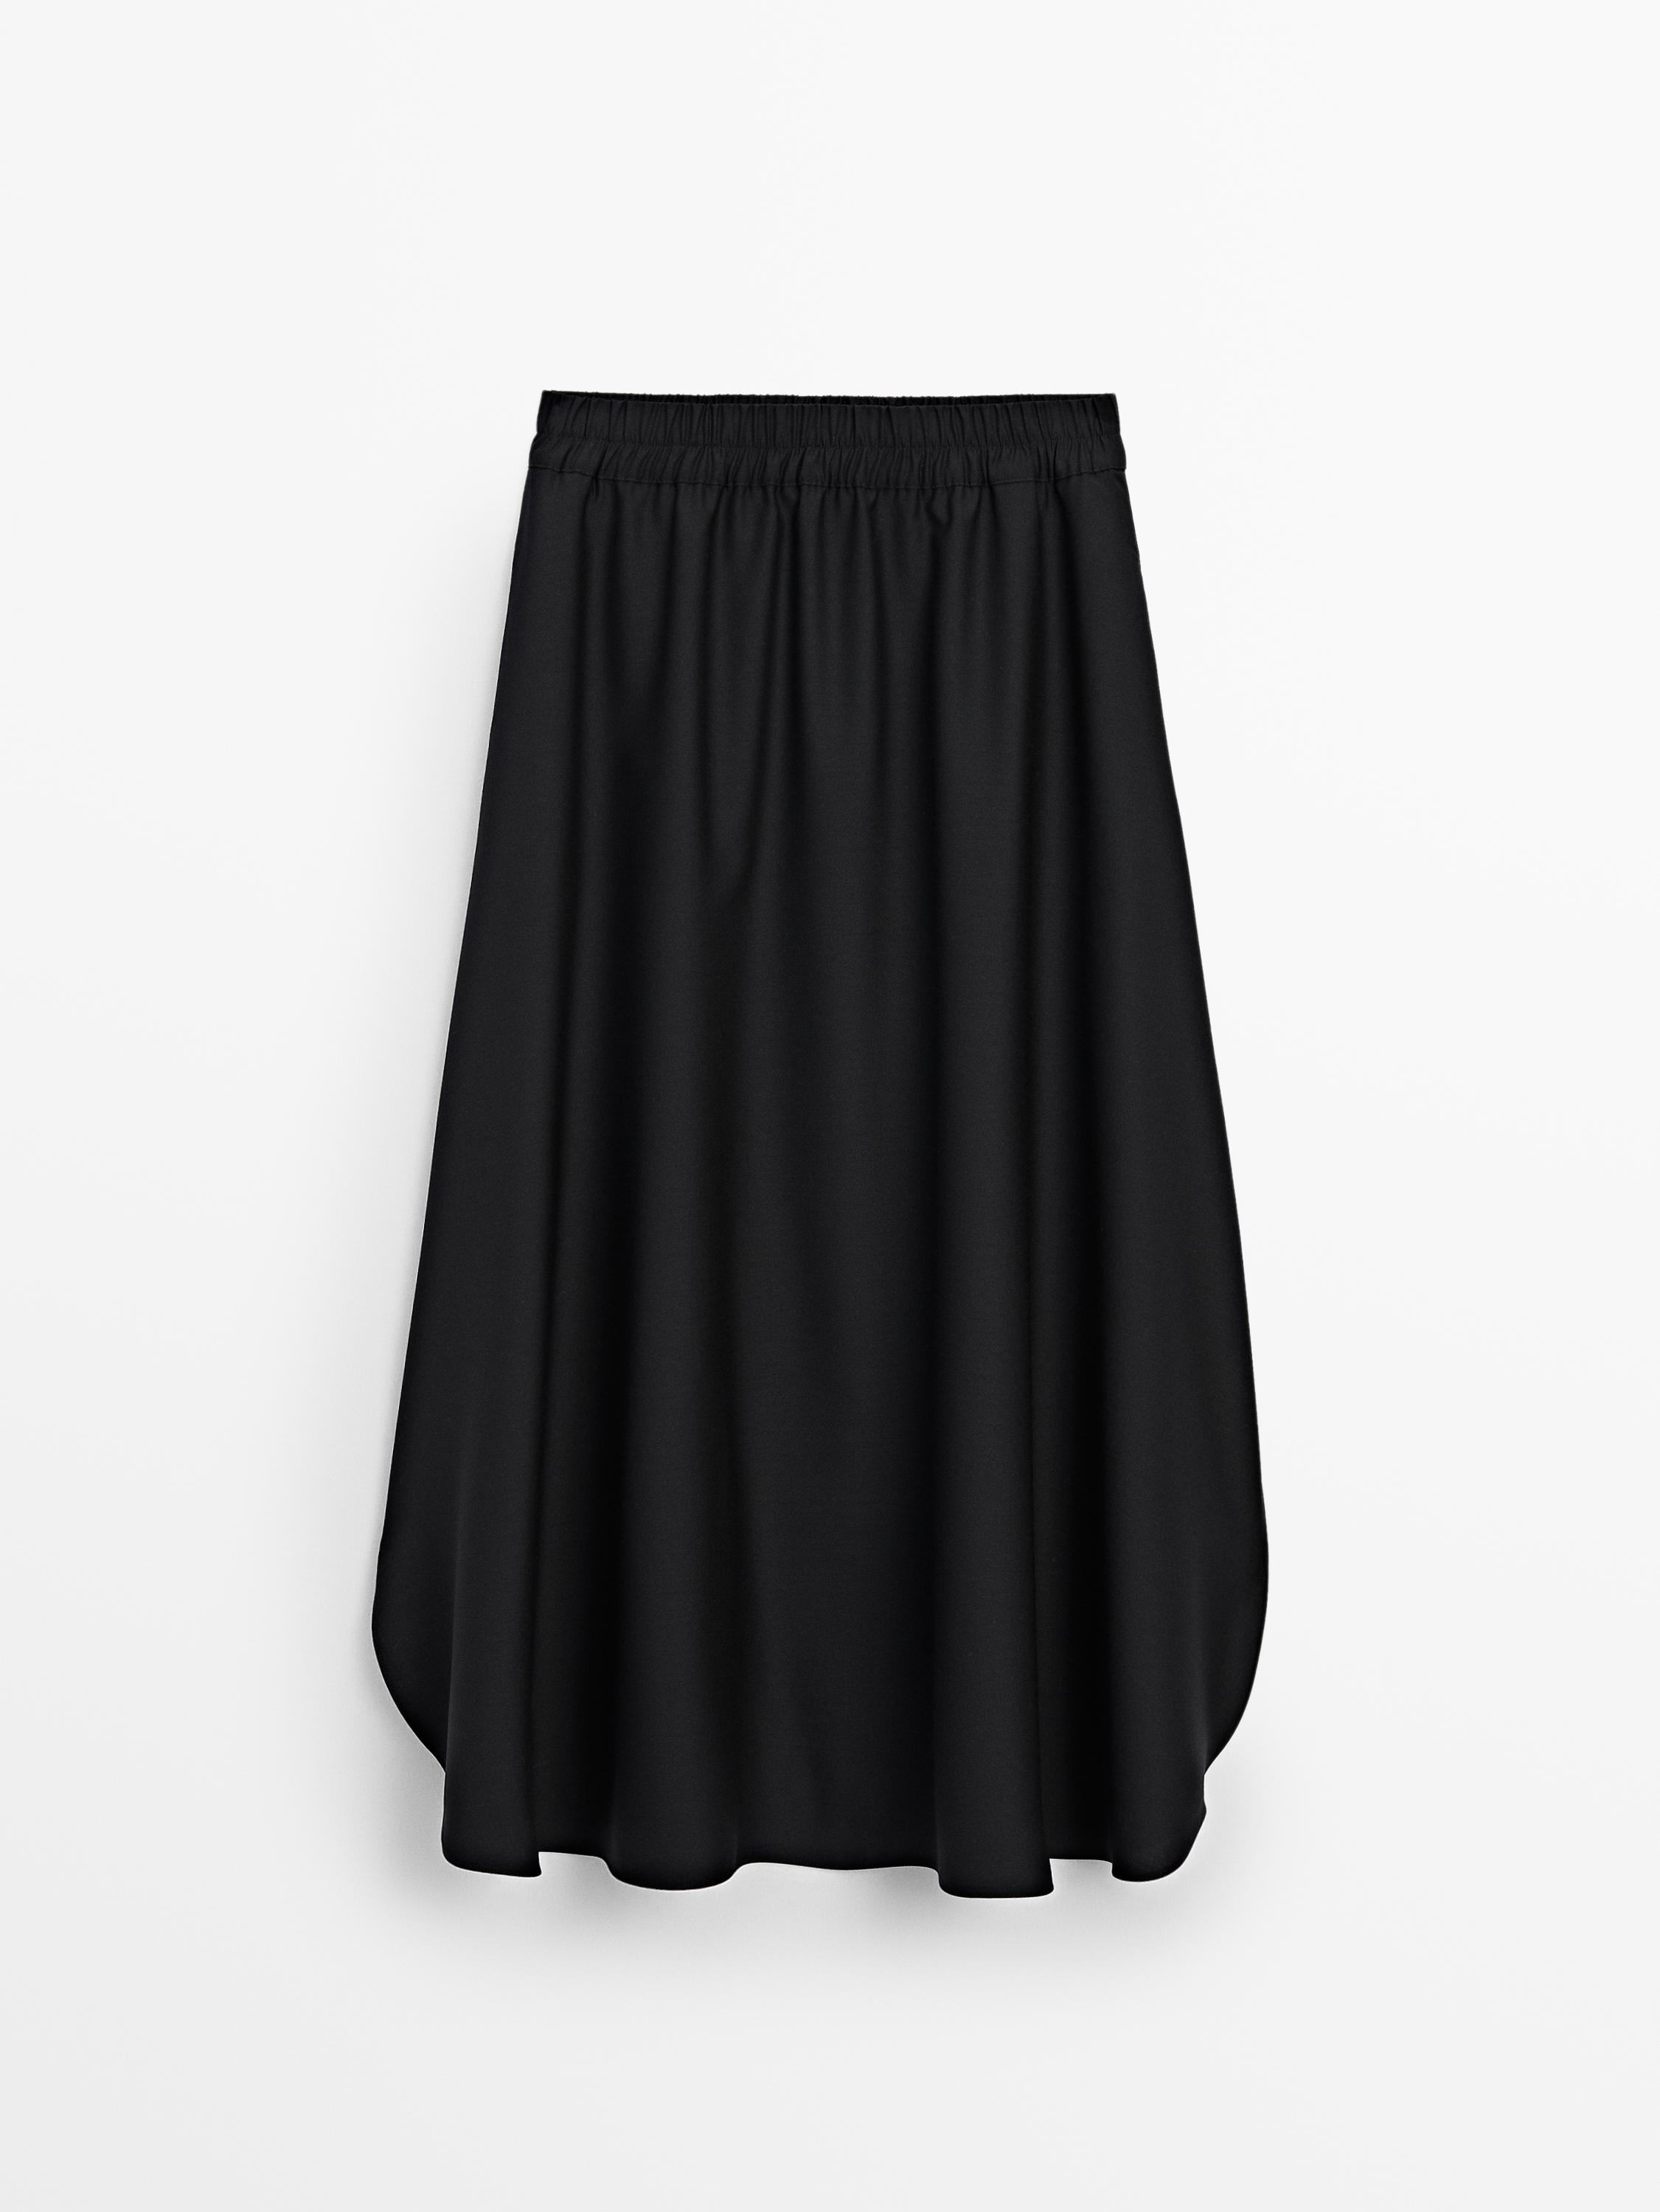 Long skirt with slits and elastic waistband